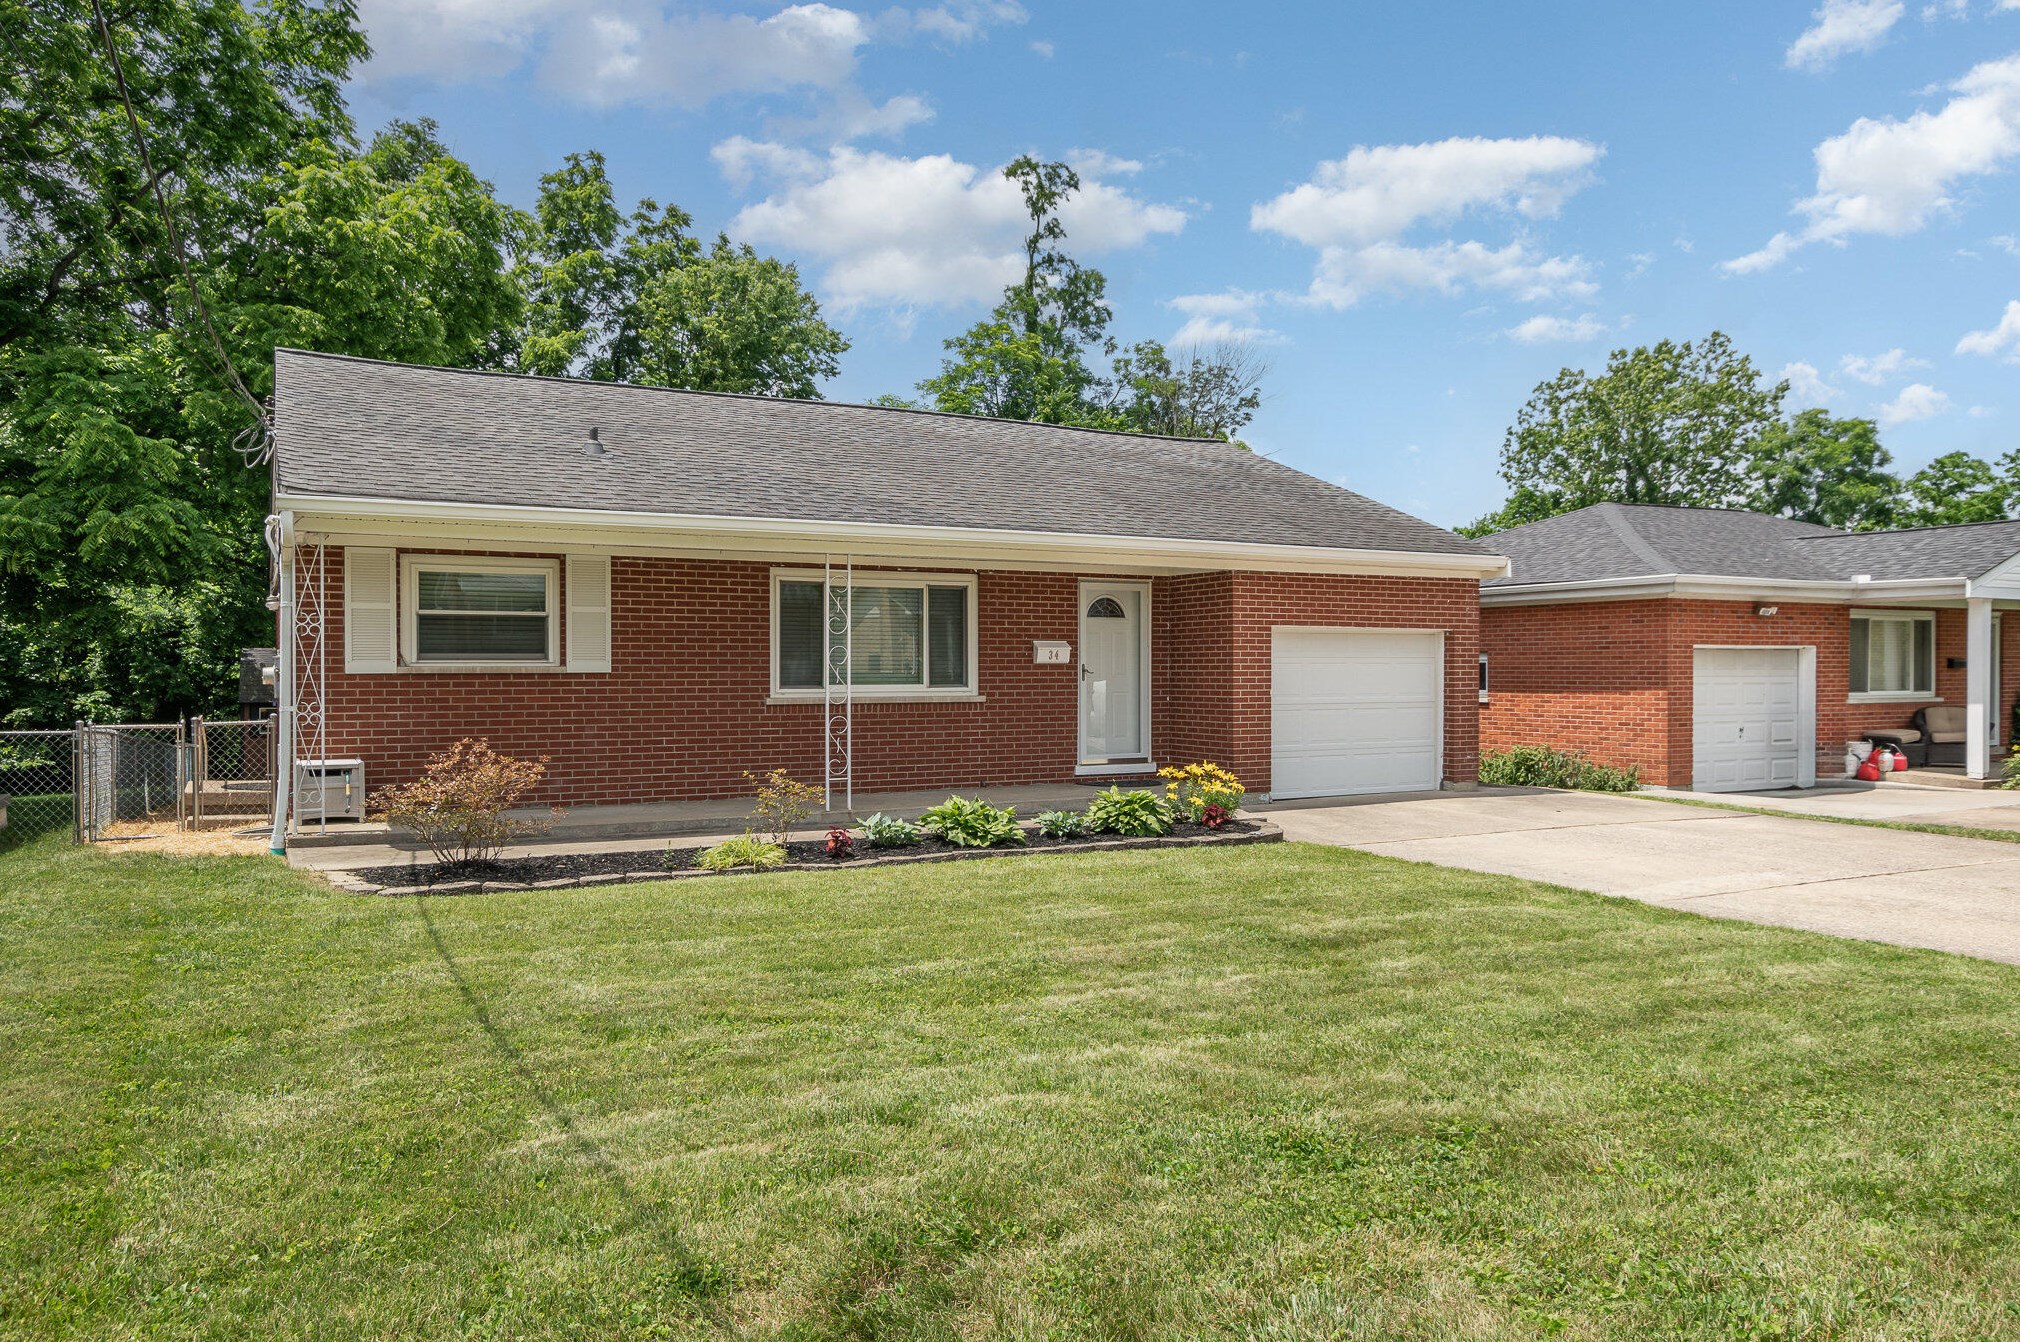 34 Burk Ave, Florence, KY 41042